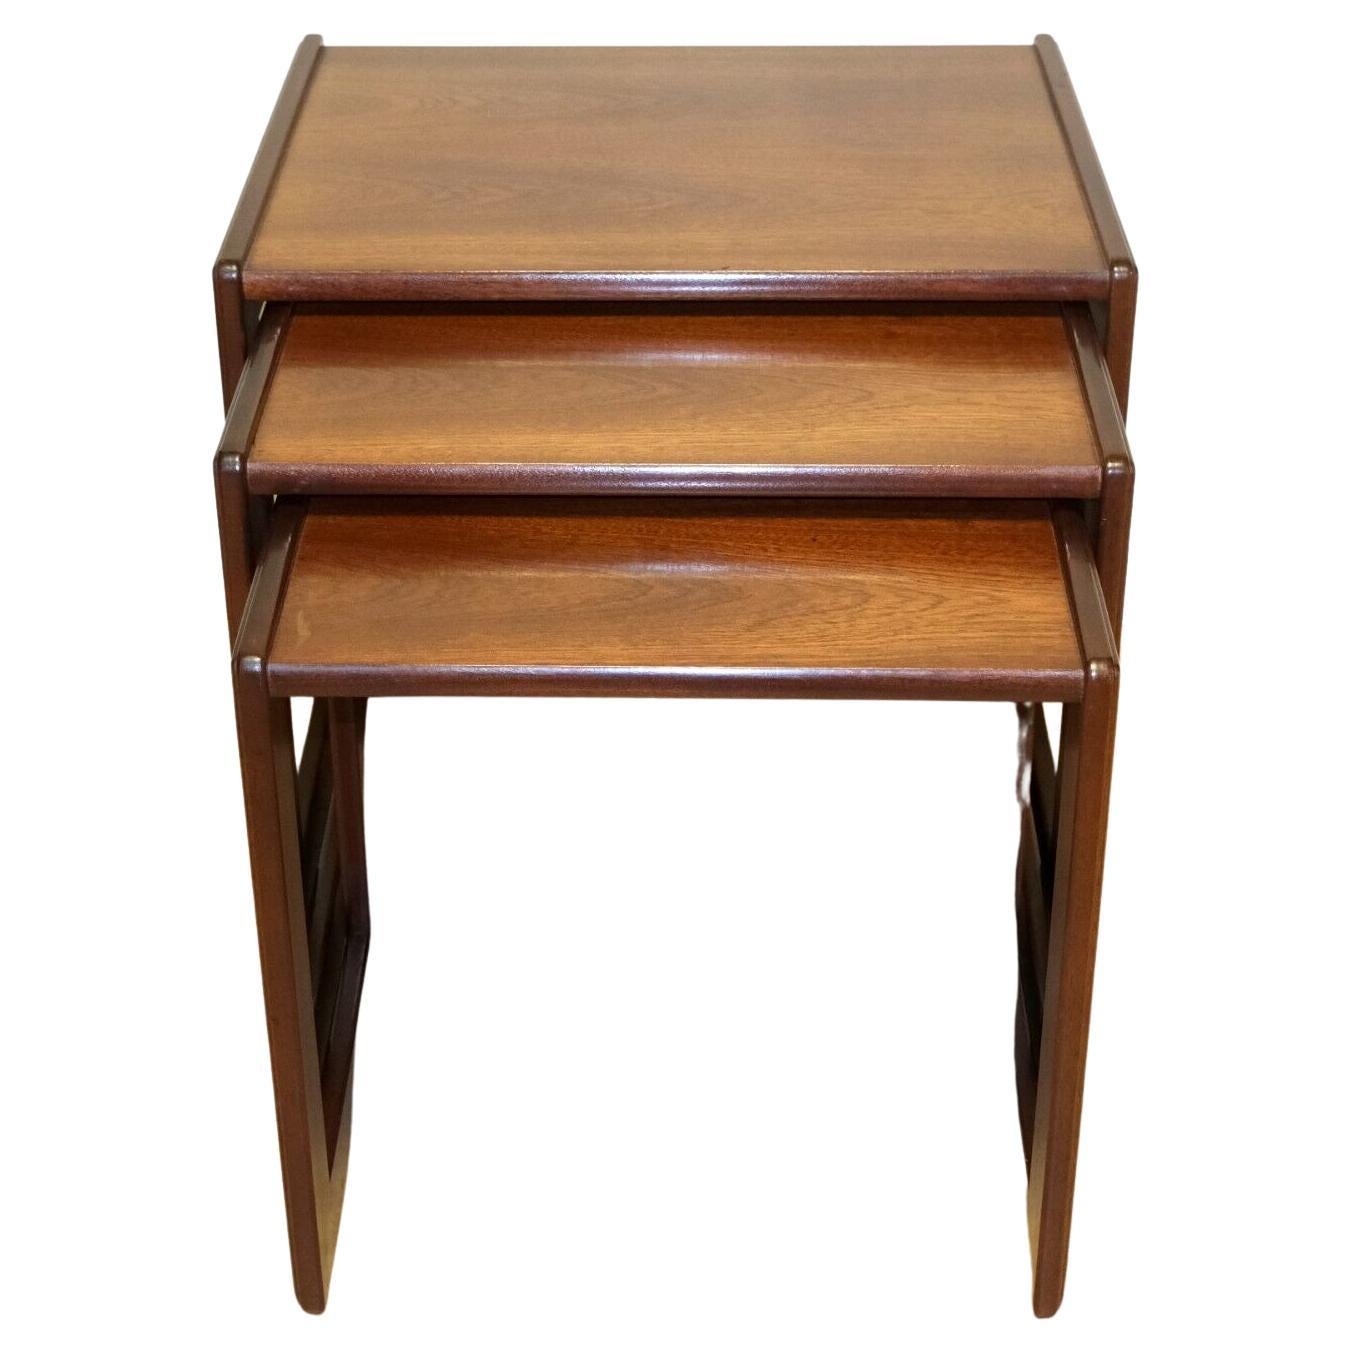 We are delighted to offer for sale this good-looking Art Deco G Plan brown Teak set nest of tables on square support.

This charming and beautiful set offers you elegance and quality. The joints on the legs show the tight minimalist design as G Plan